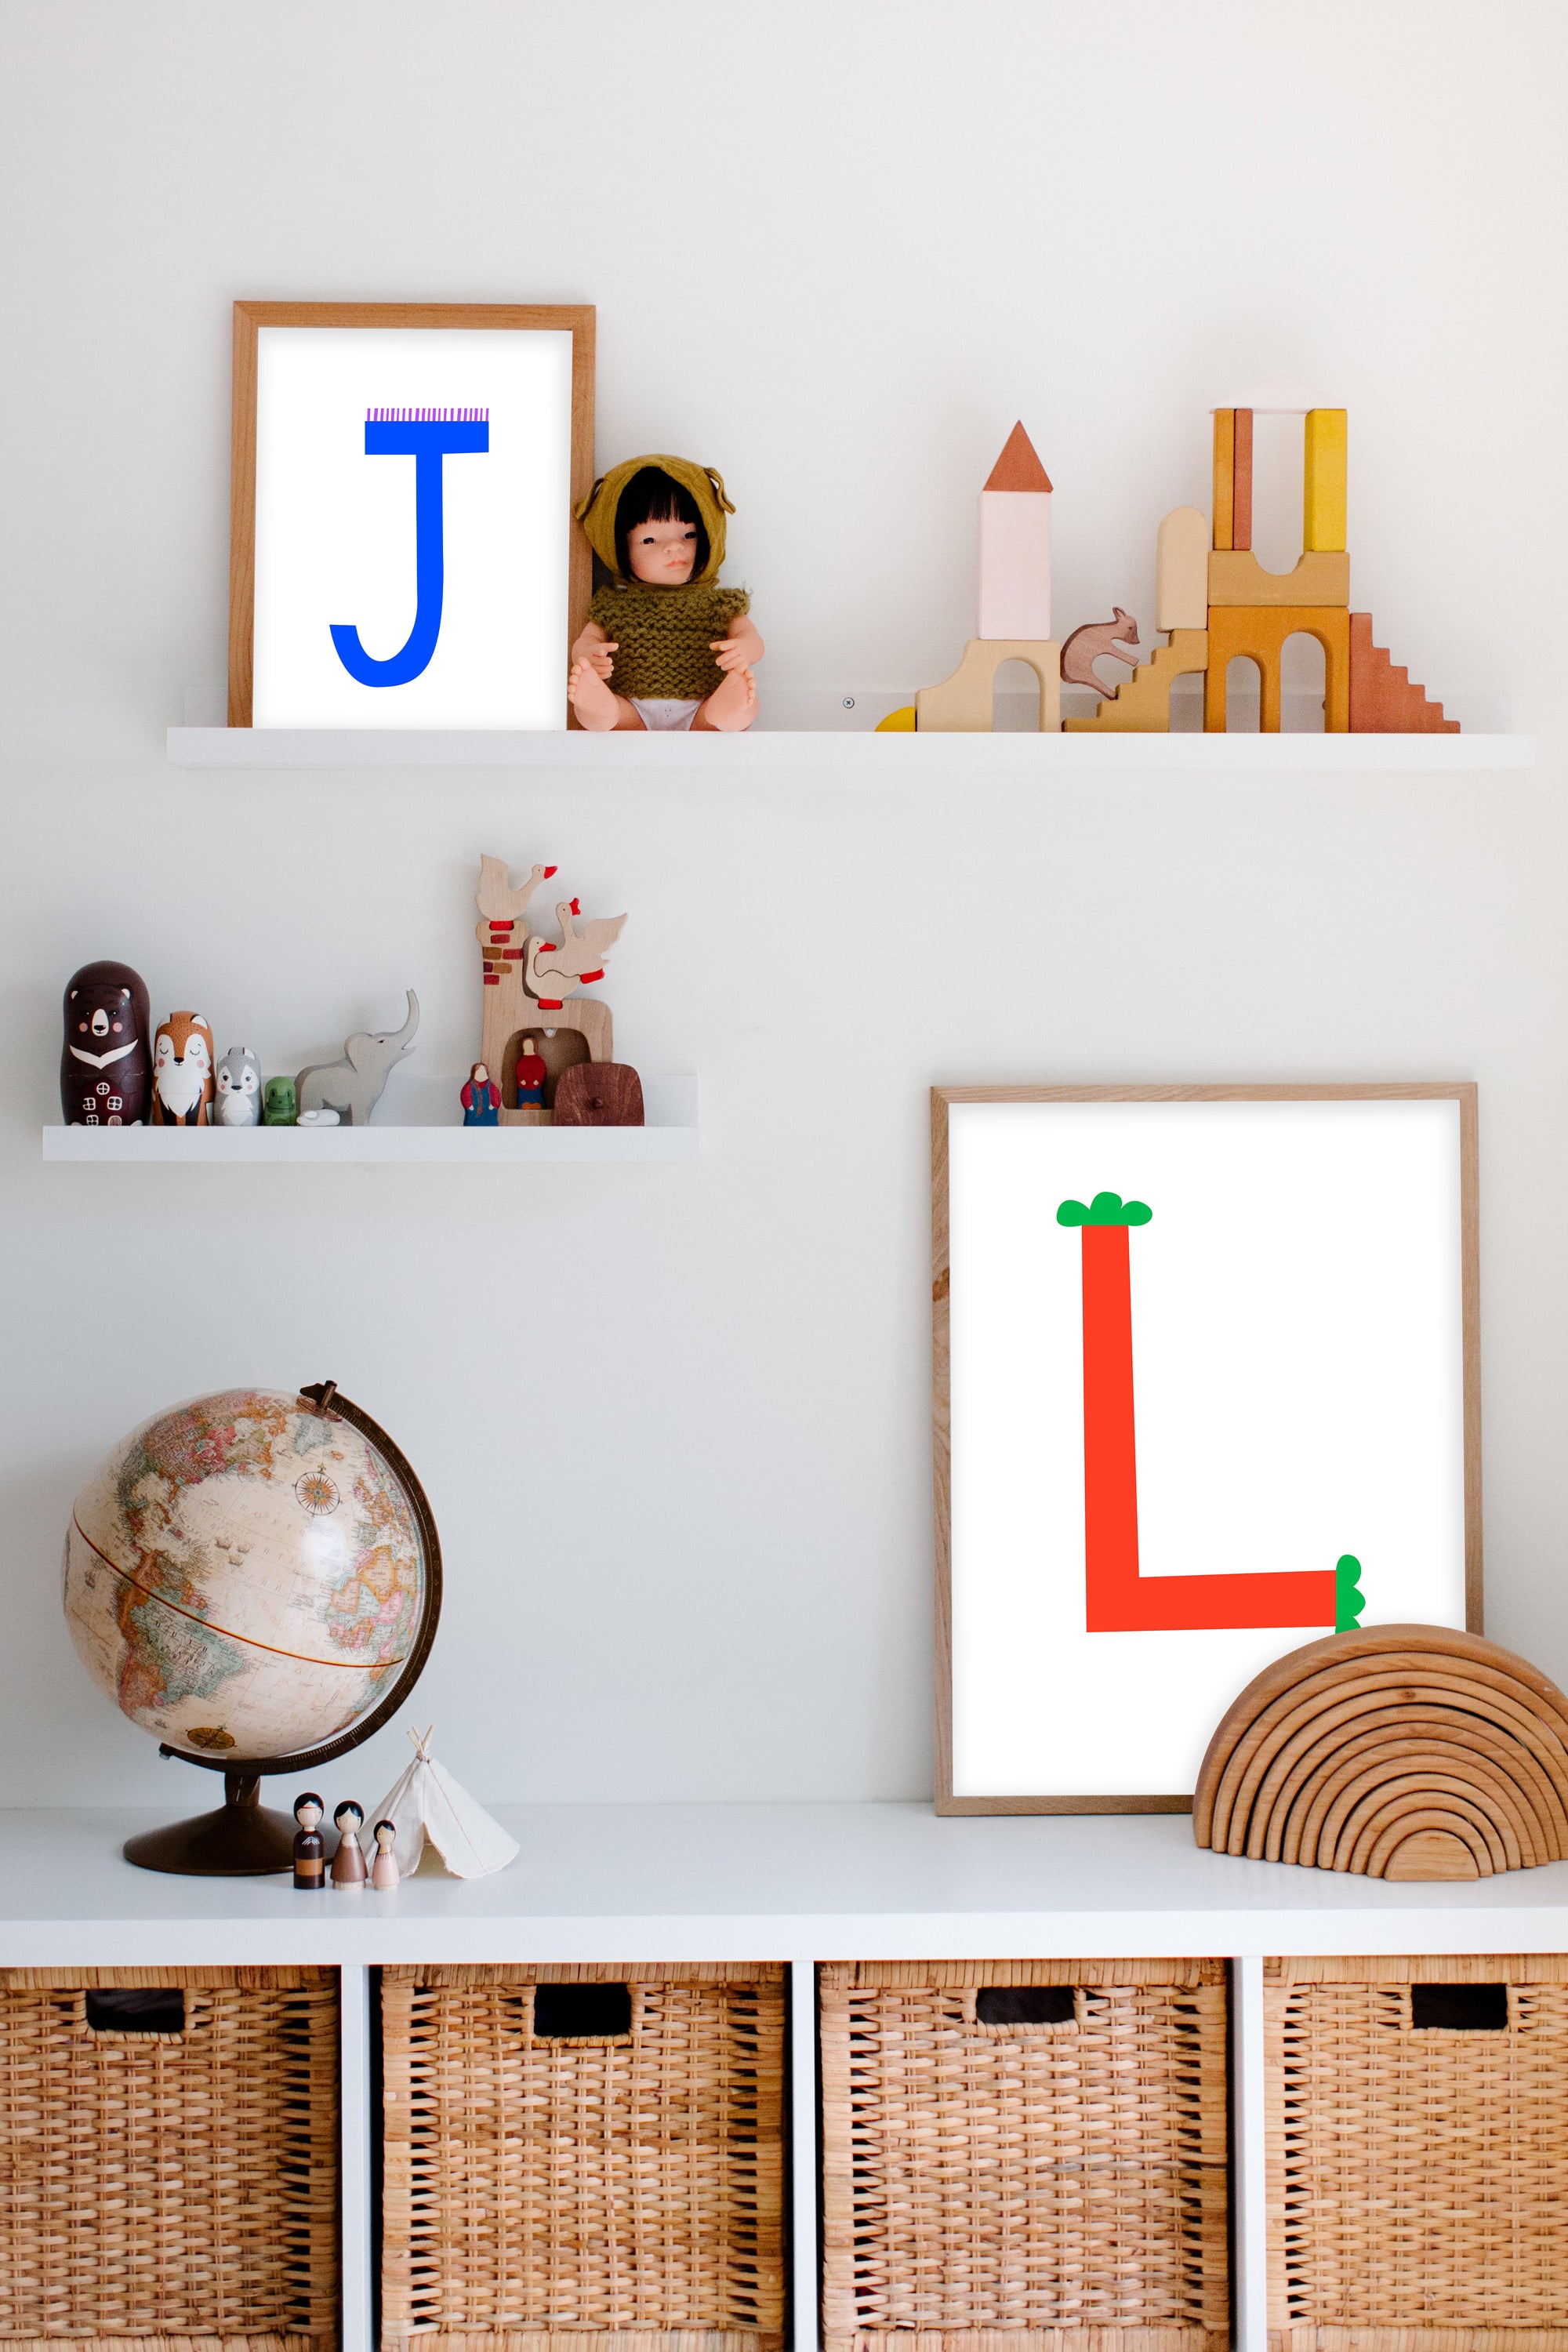 Sweet letter L print red-Little Fish Co.